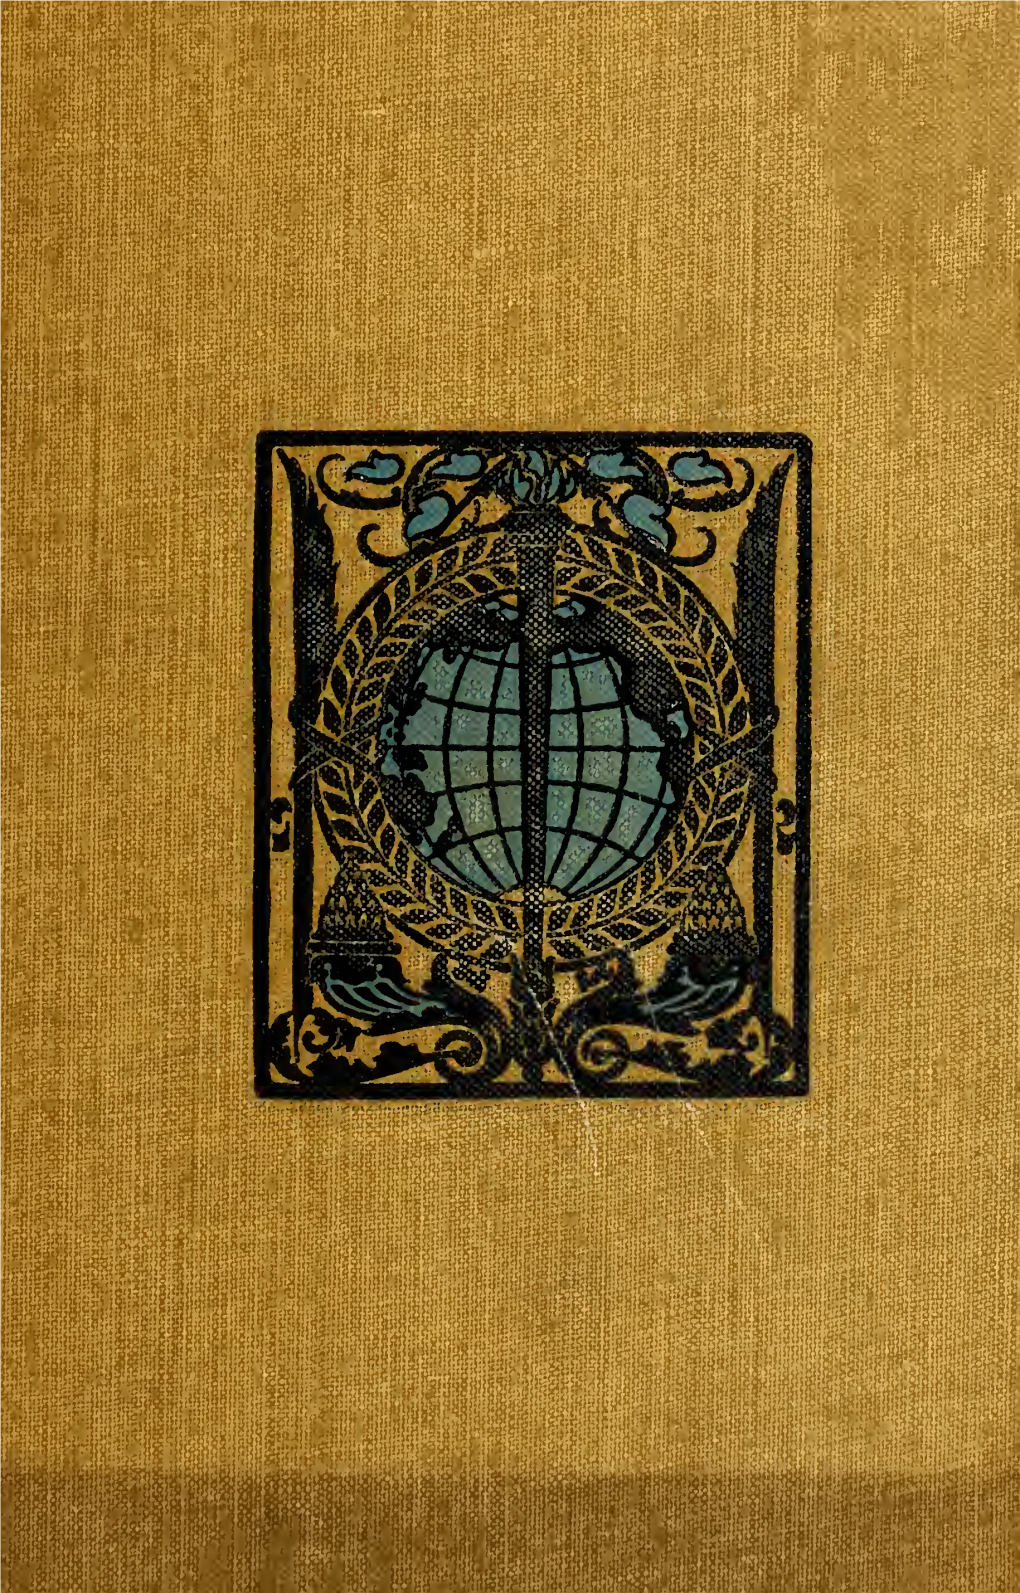 The World's Great Events (1901) Volume 3